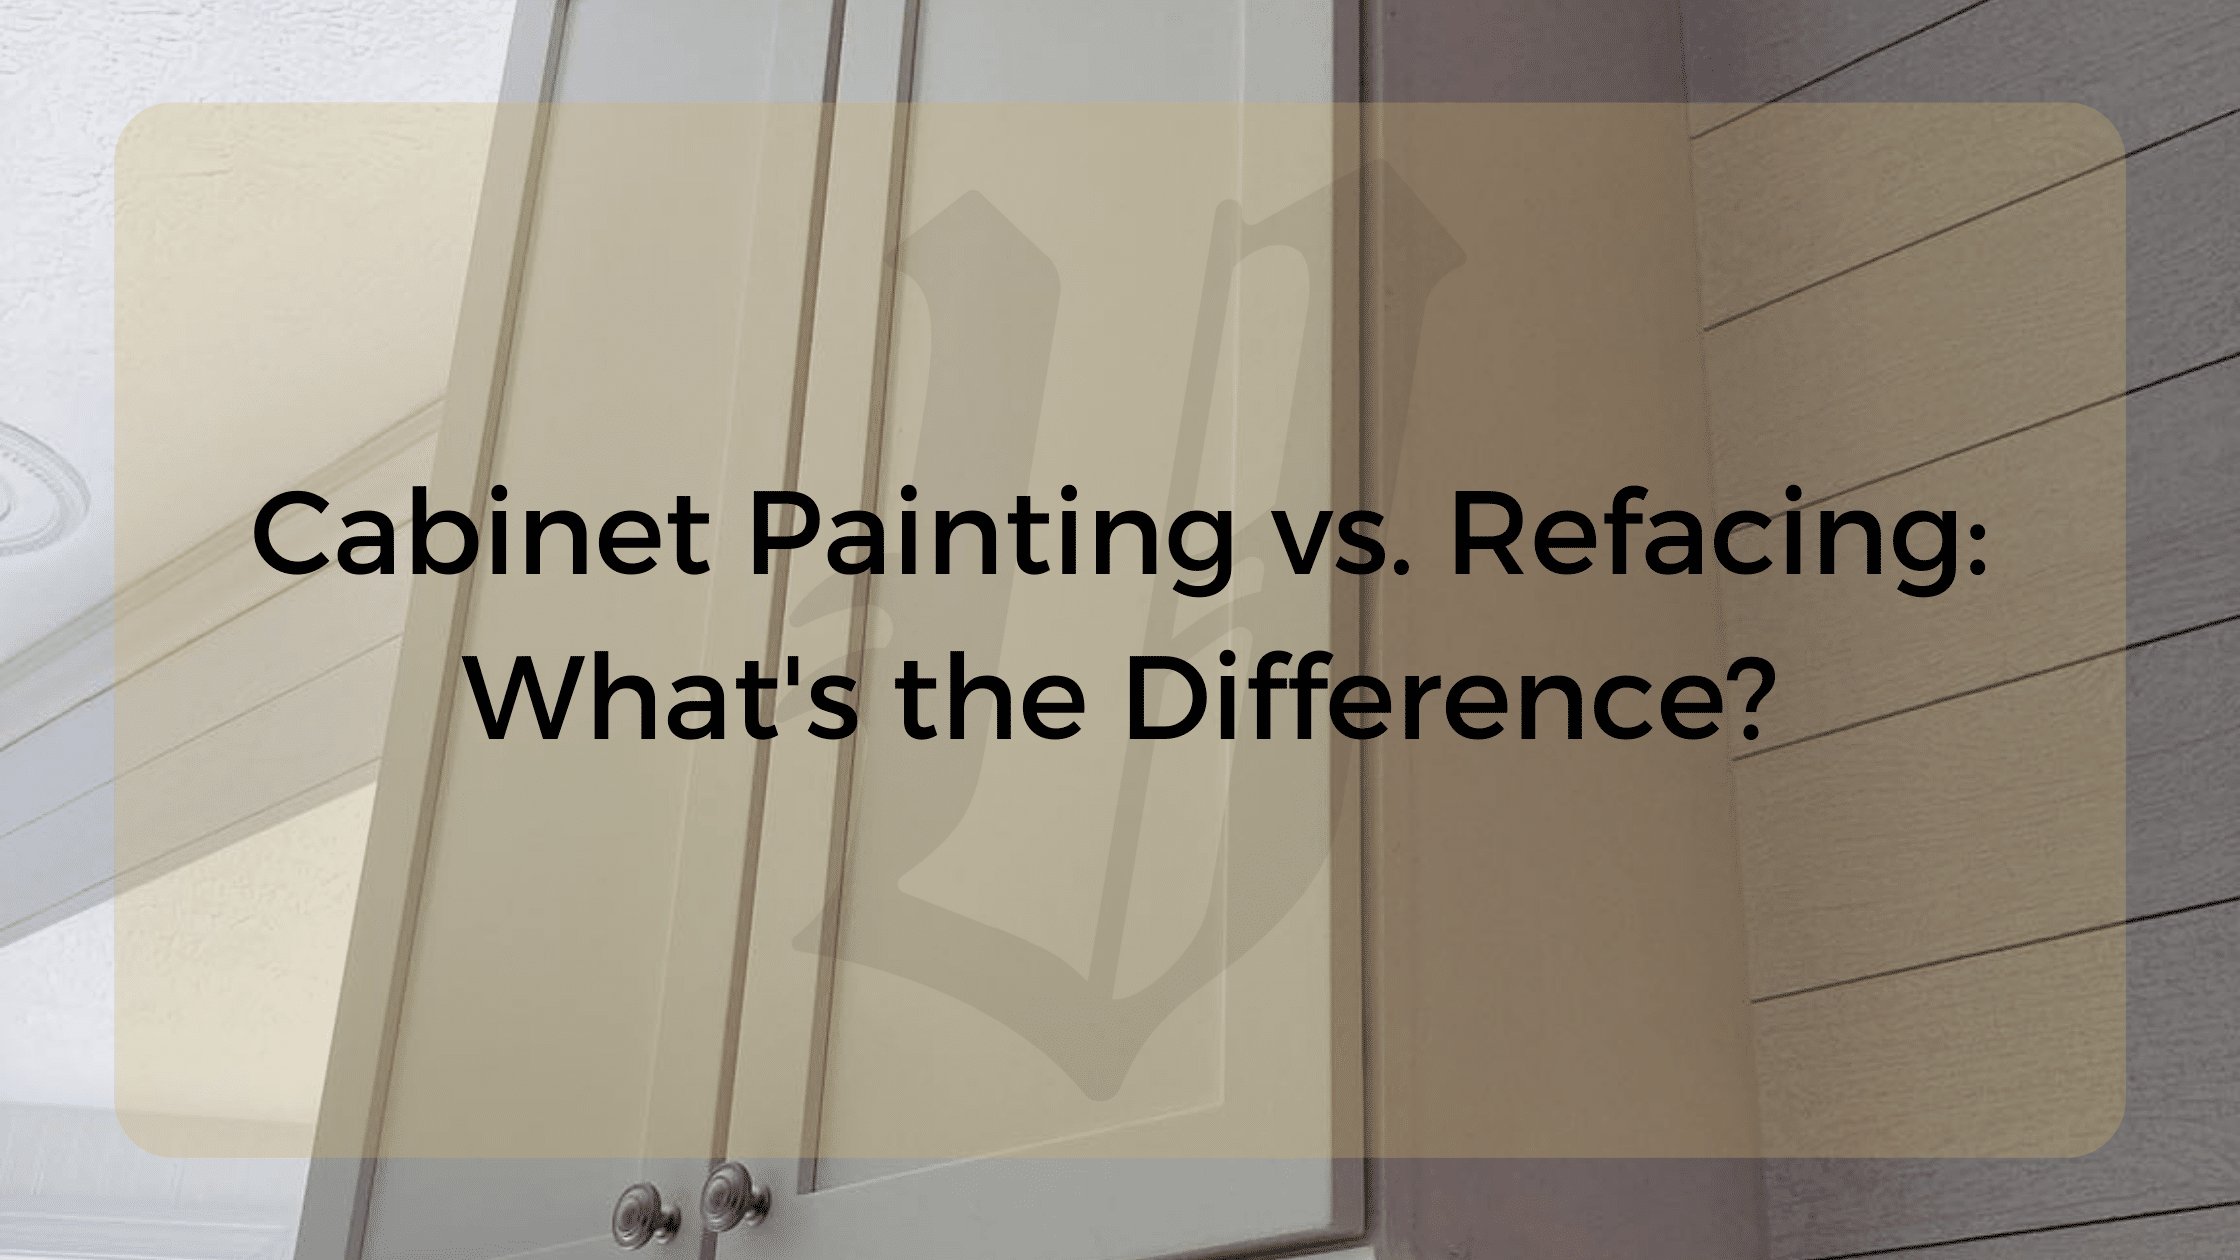 Cabinet Painting Vs. Refacing What's the Difference